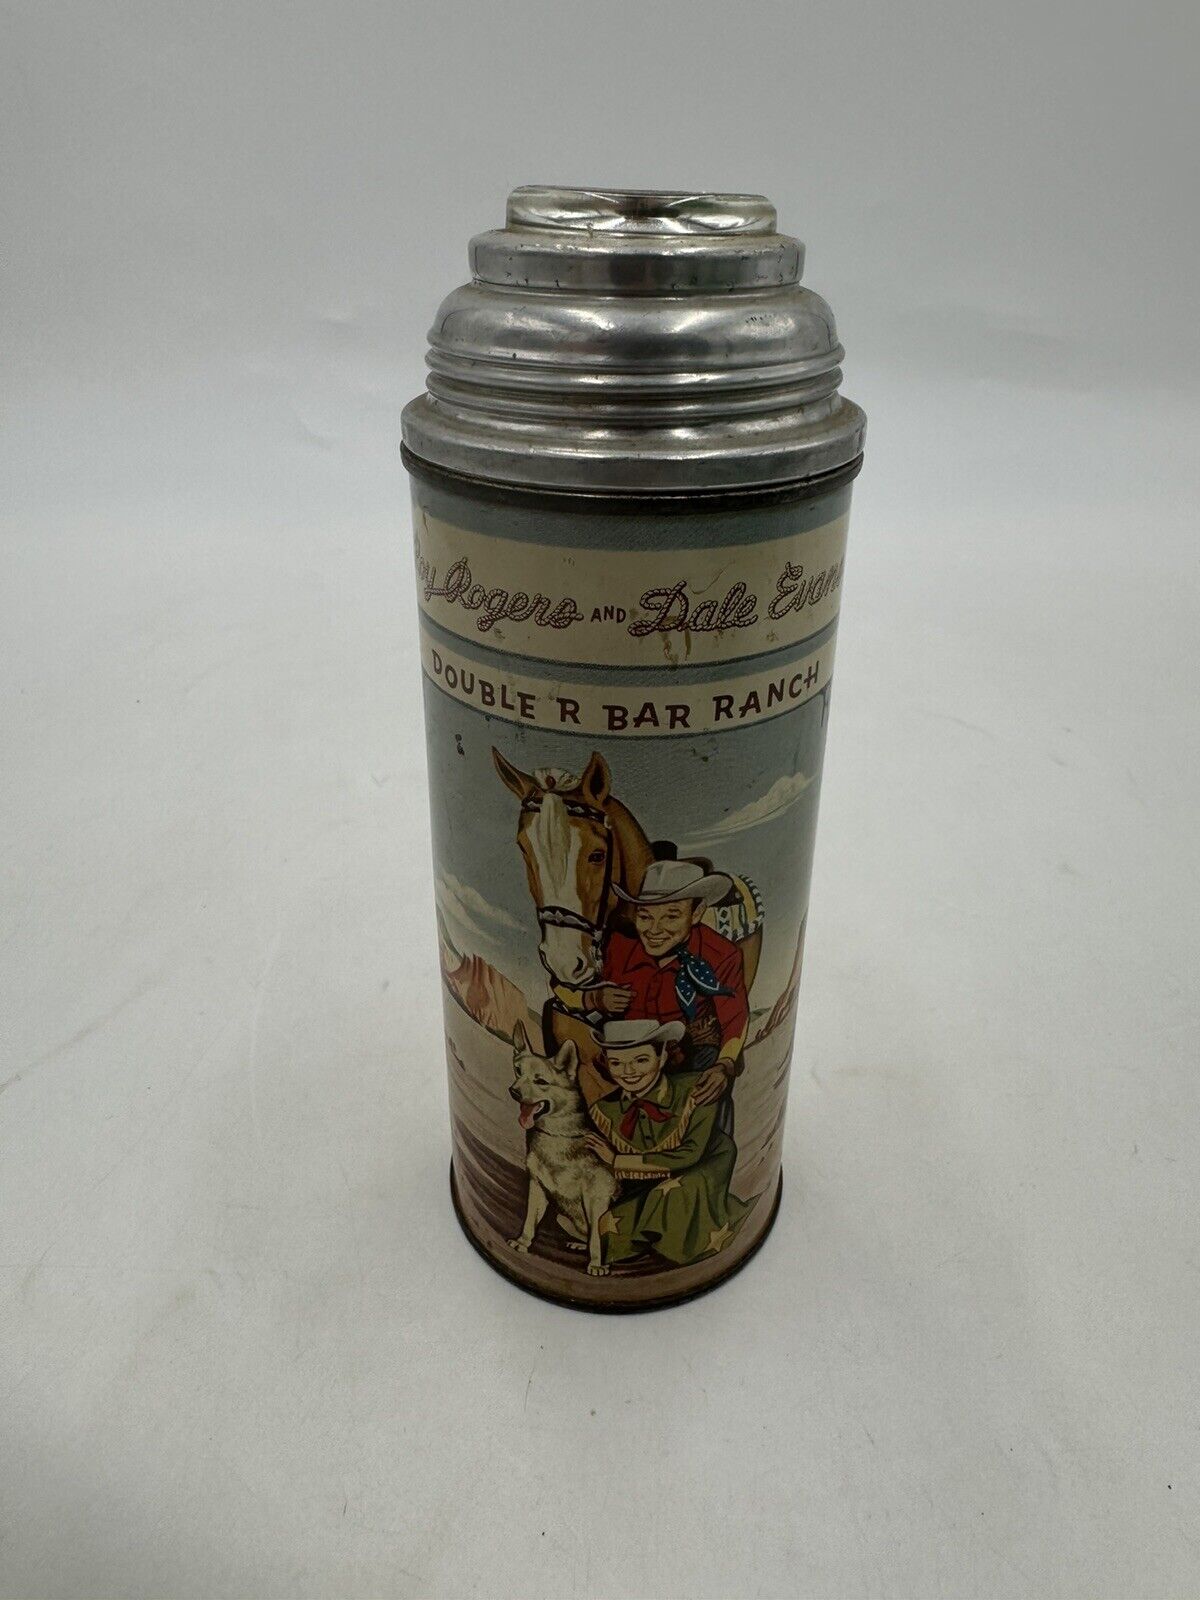 VTG Roy Rogers Dale Evans Double R Bar Ranch Metal Thermos 1950s No Cap